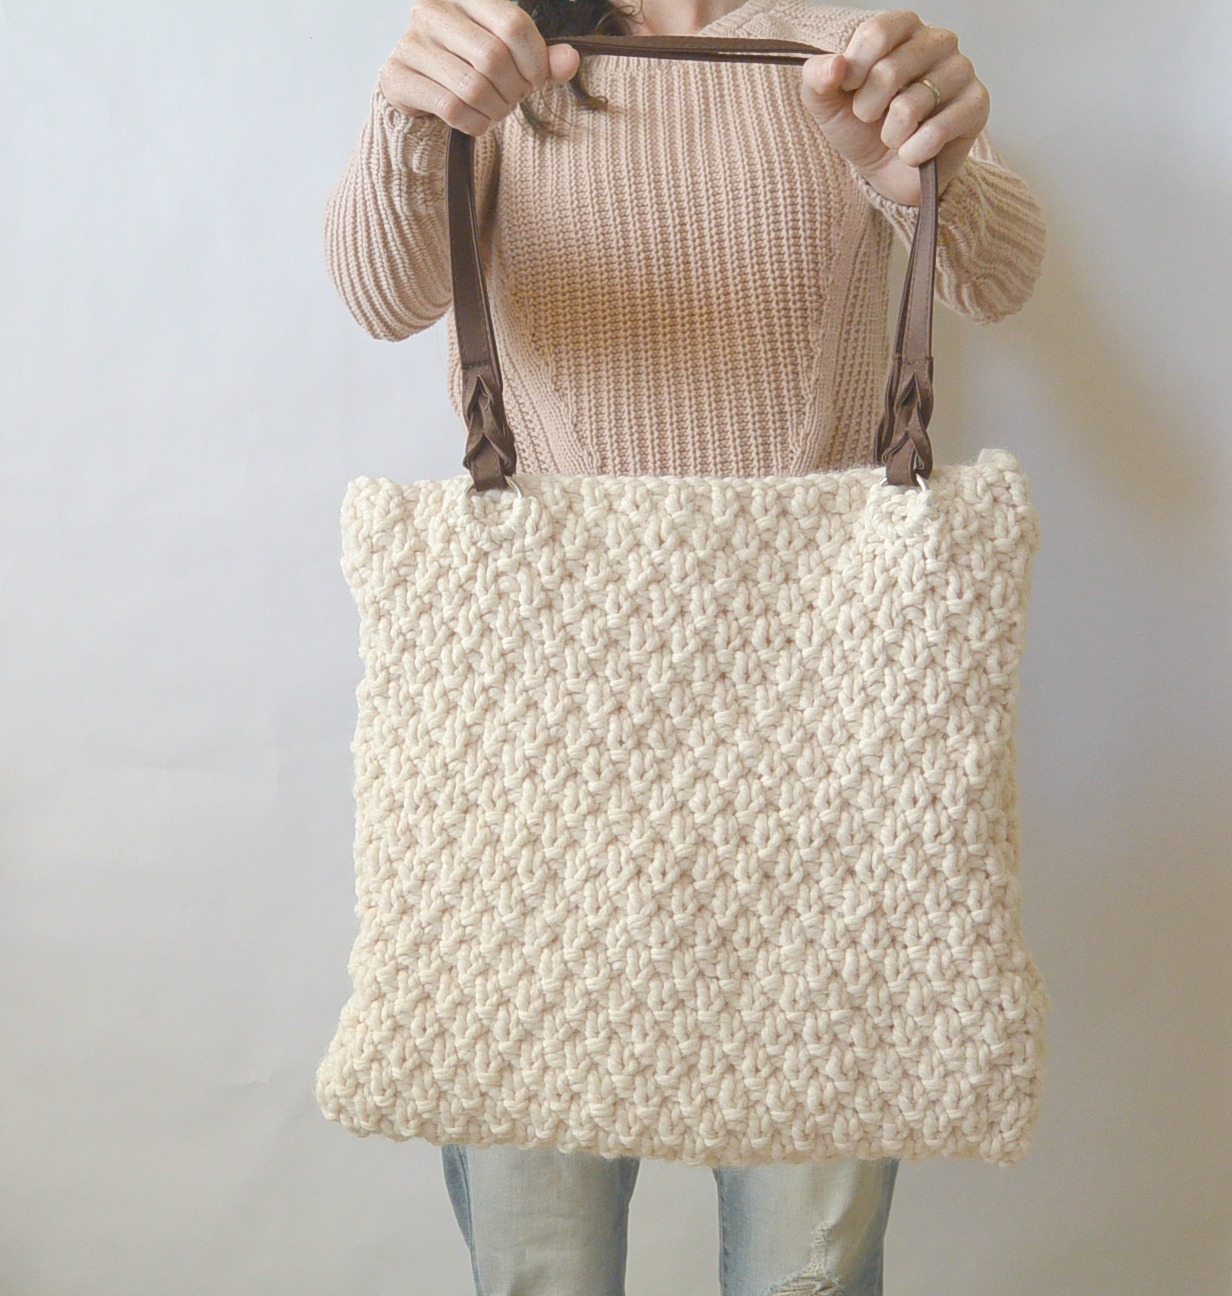 How to Make a Bag Using Whatever – Modern Daily Knitting